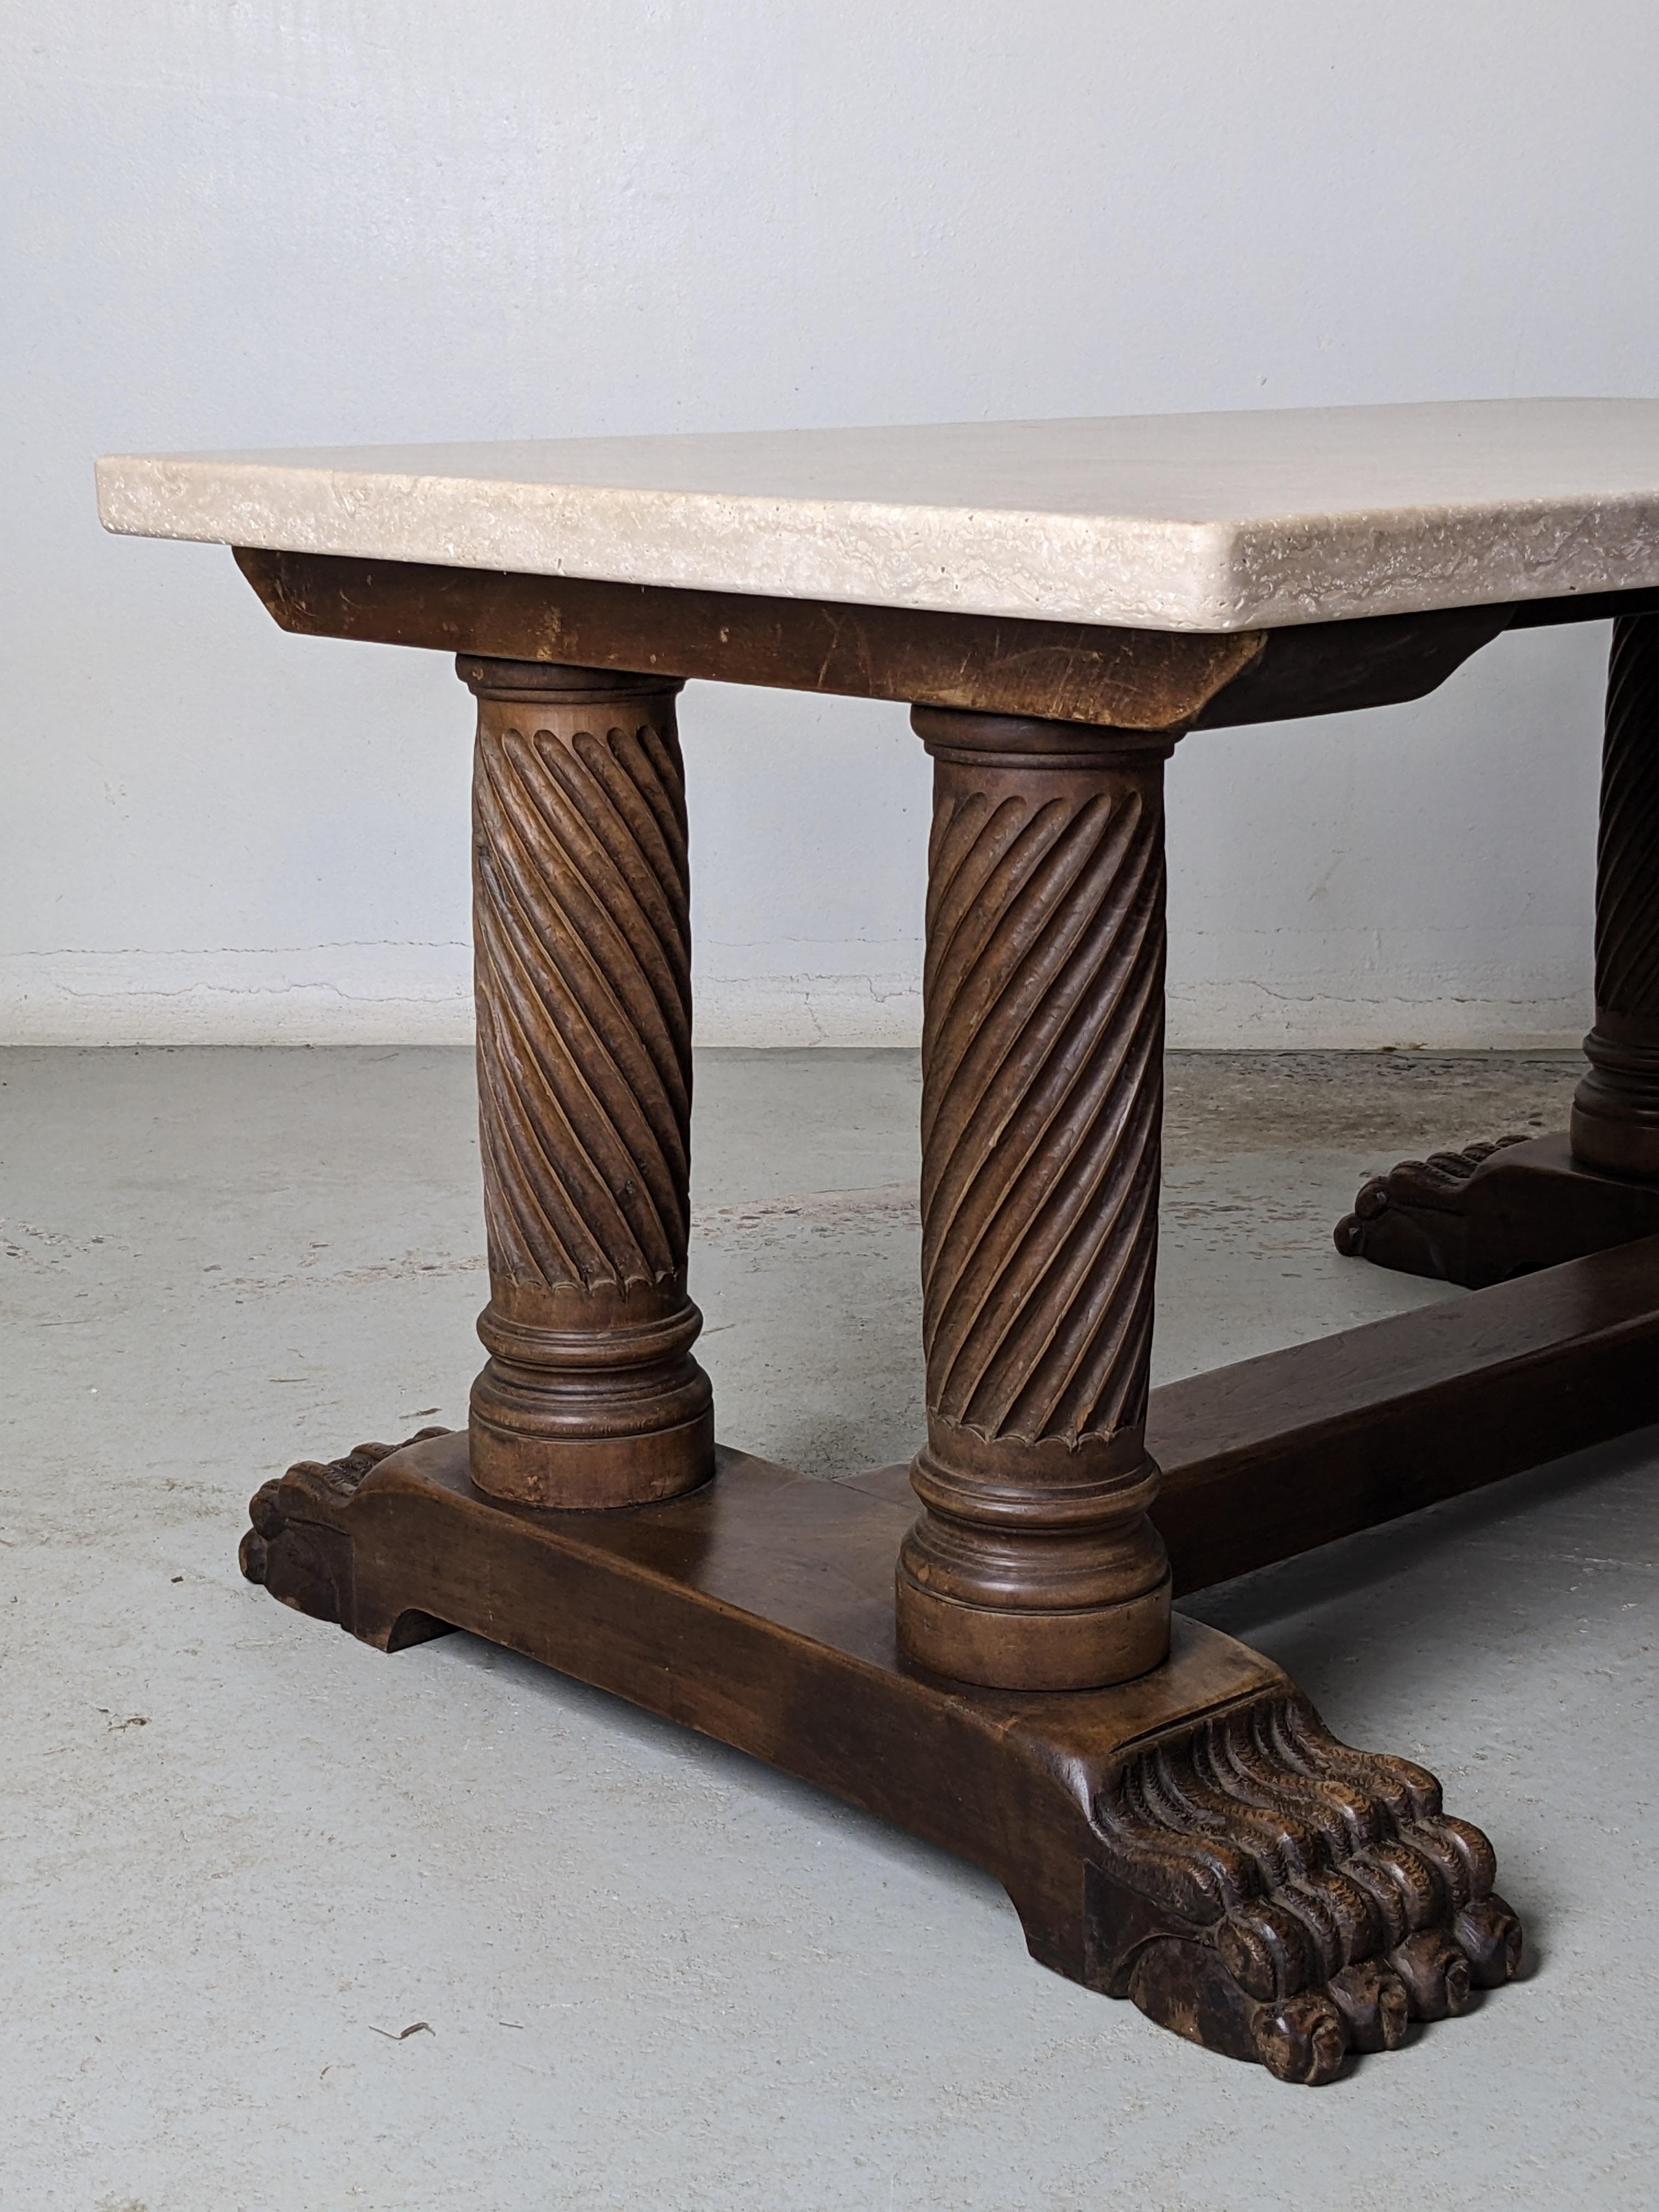 Mid-20th Century Art Deco Coffee Table, Sculpted Wood Base & Travertine Top, France 1940s For Sale